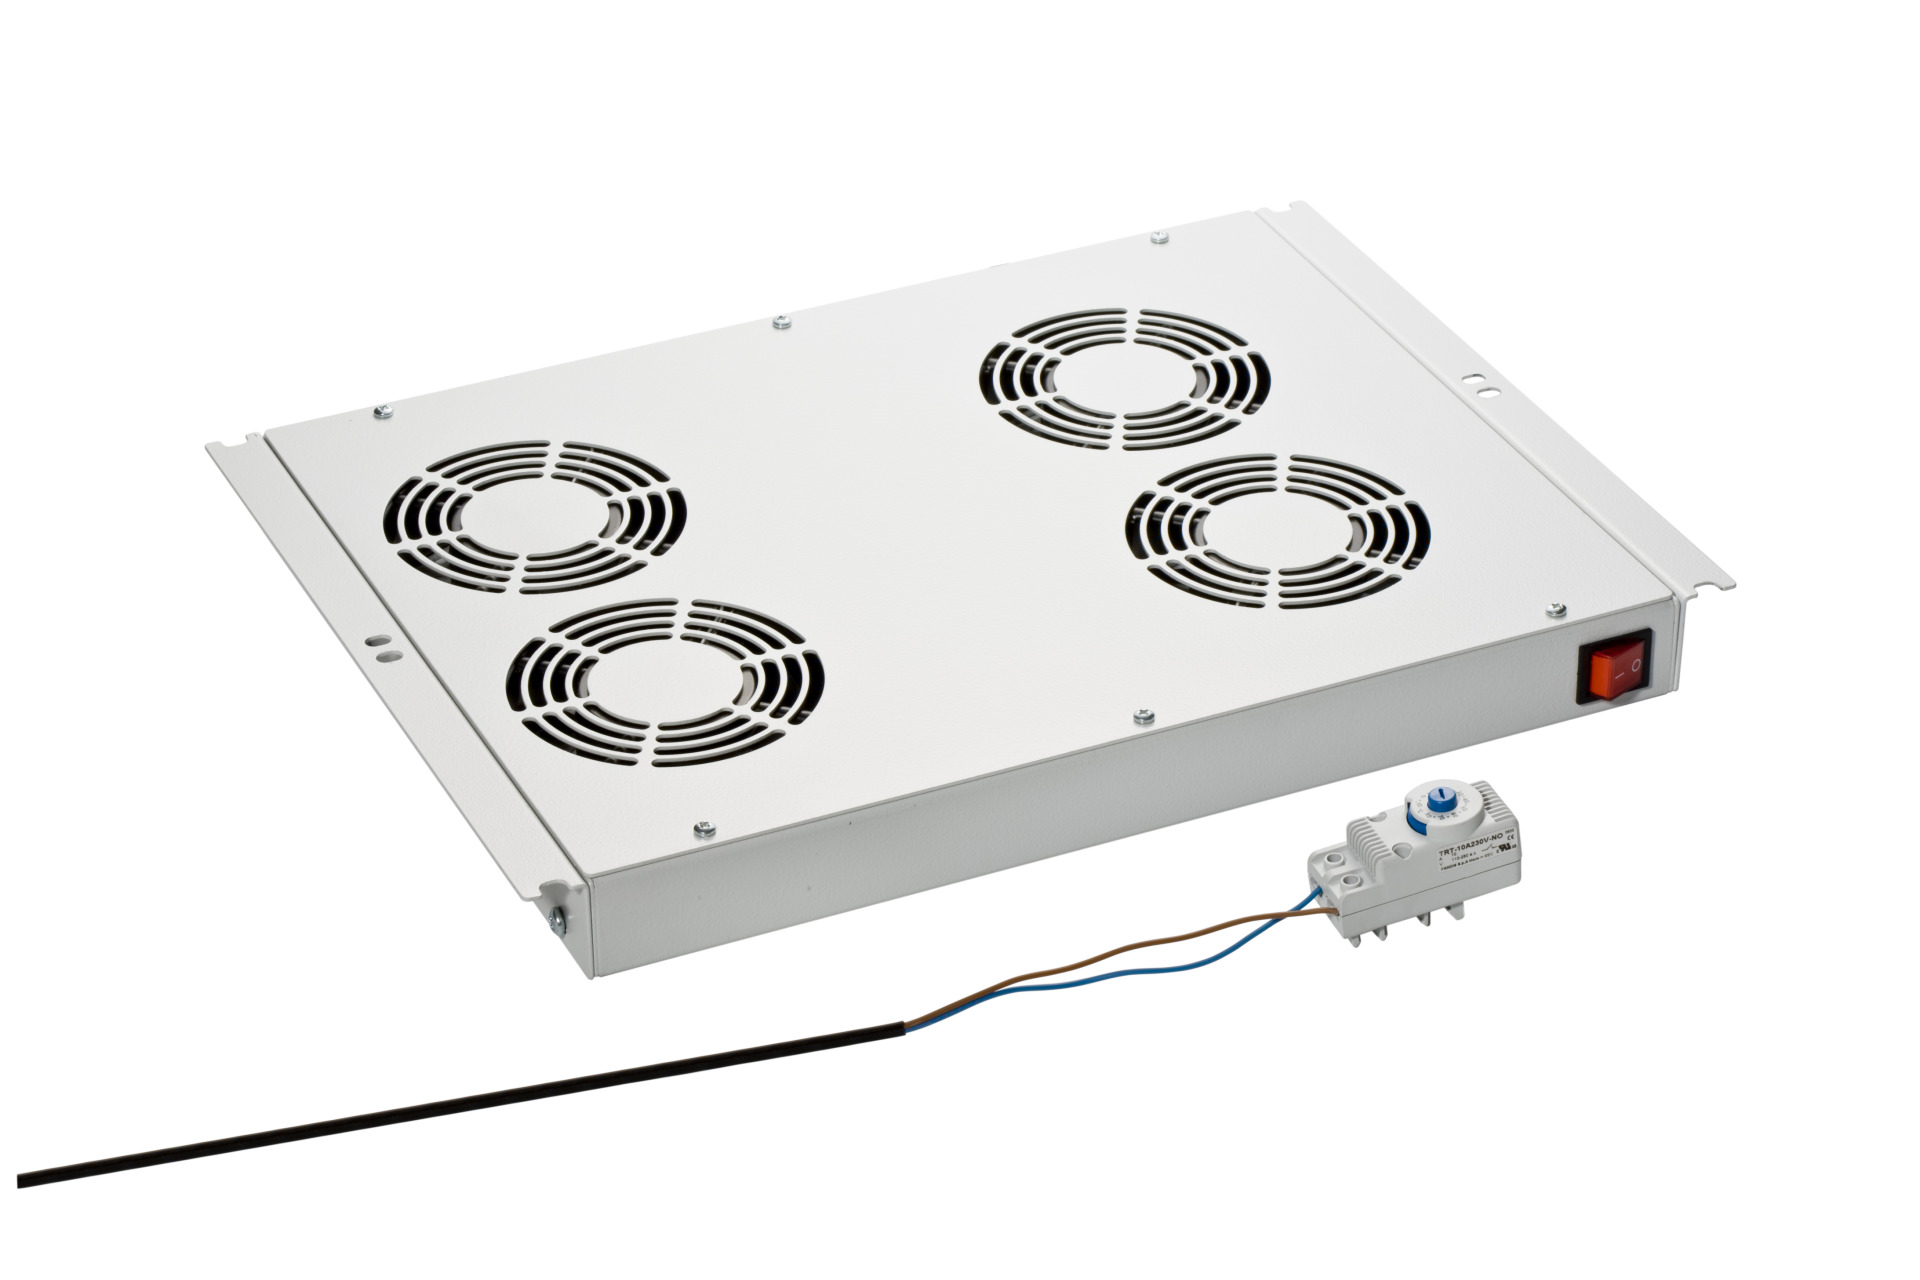 Roof Fan Unit, 4 x Fan, for Network and Server Cabinets